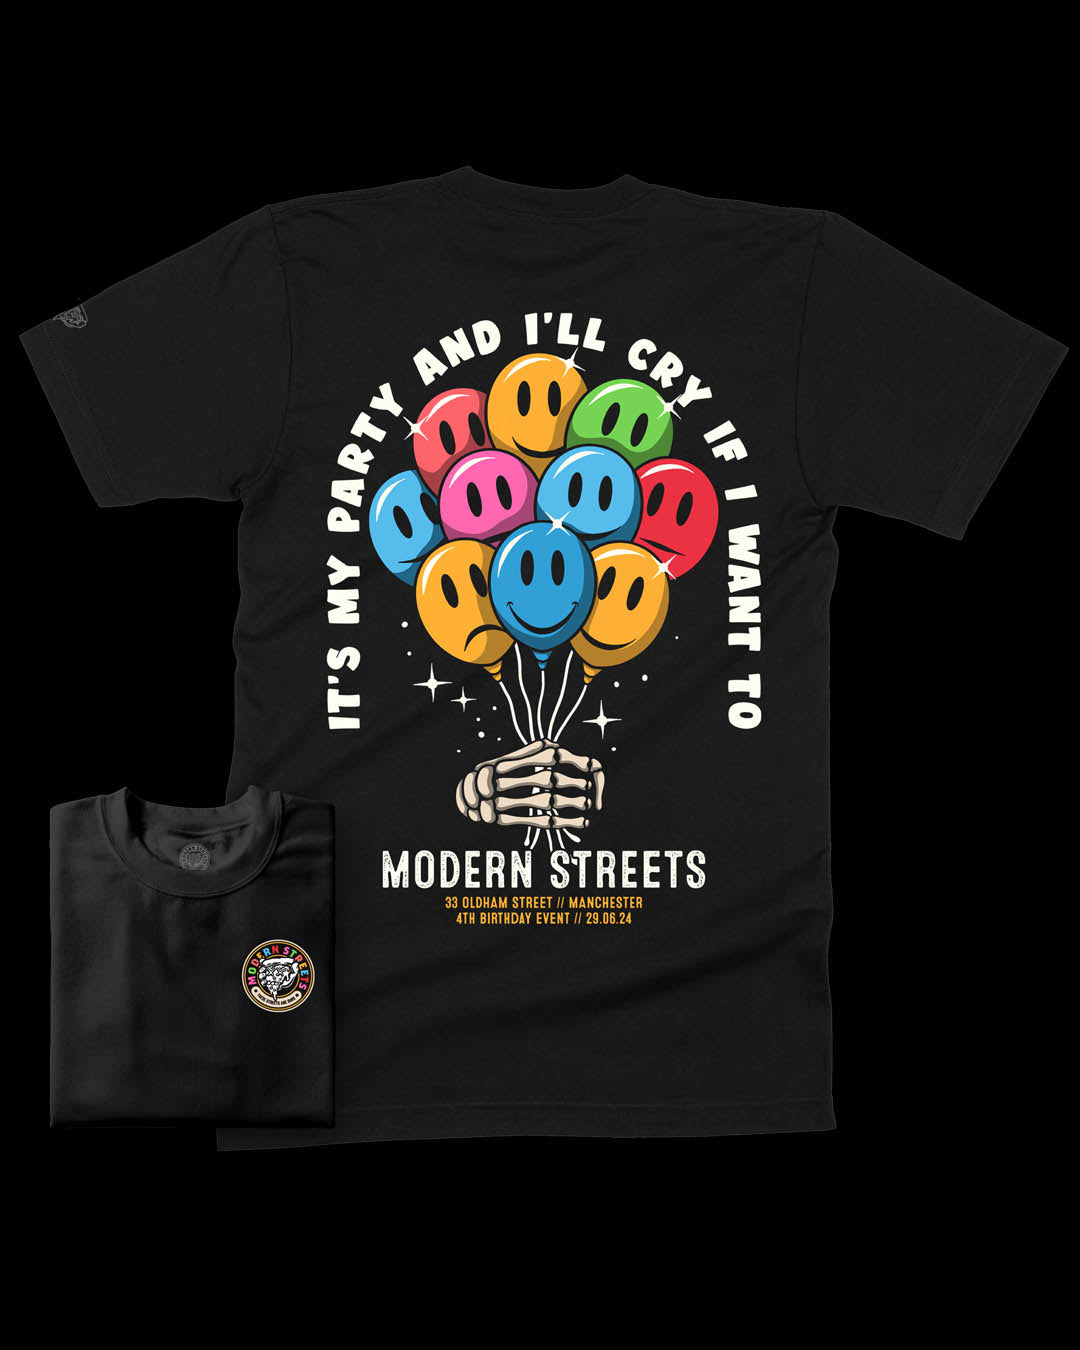 Modern Streets 4th Birthday Event - READ DESCRIPTION FOR ORDERING DETAILS